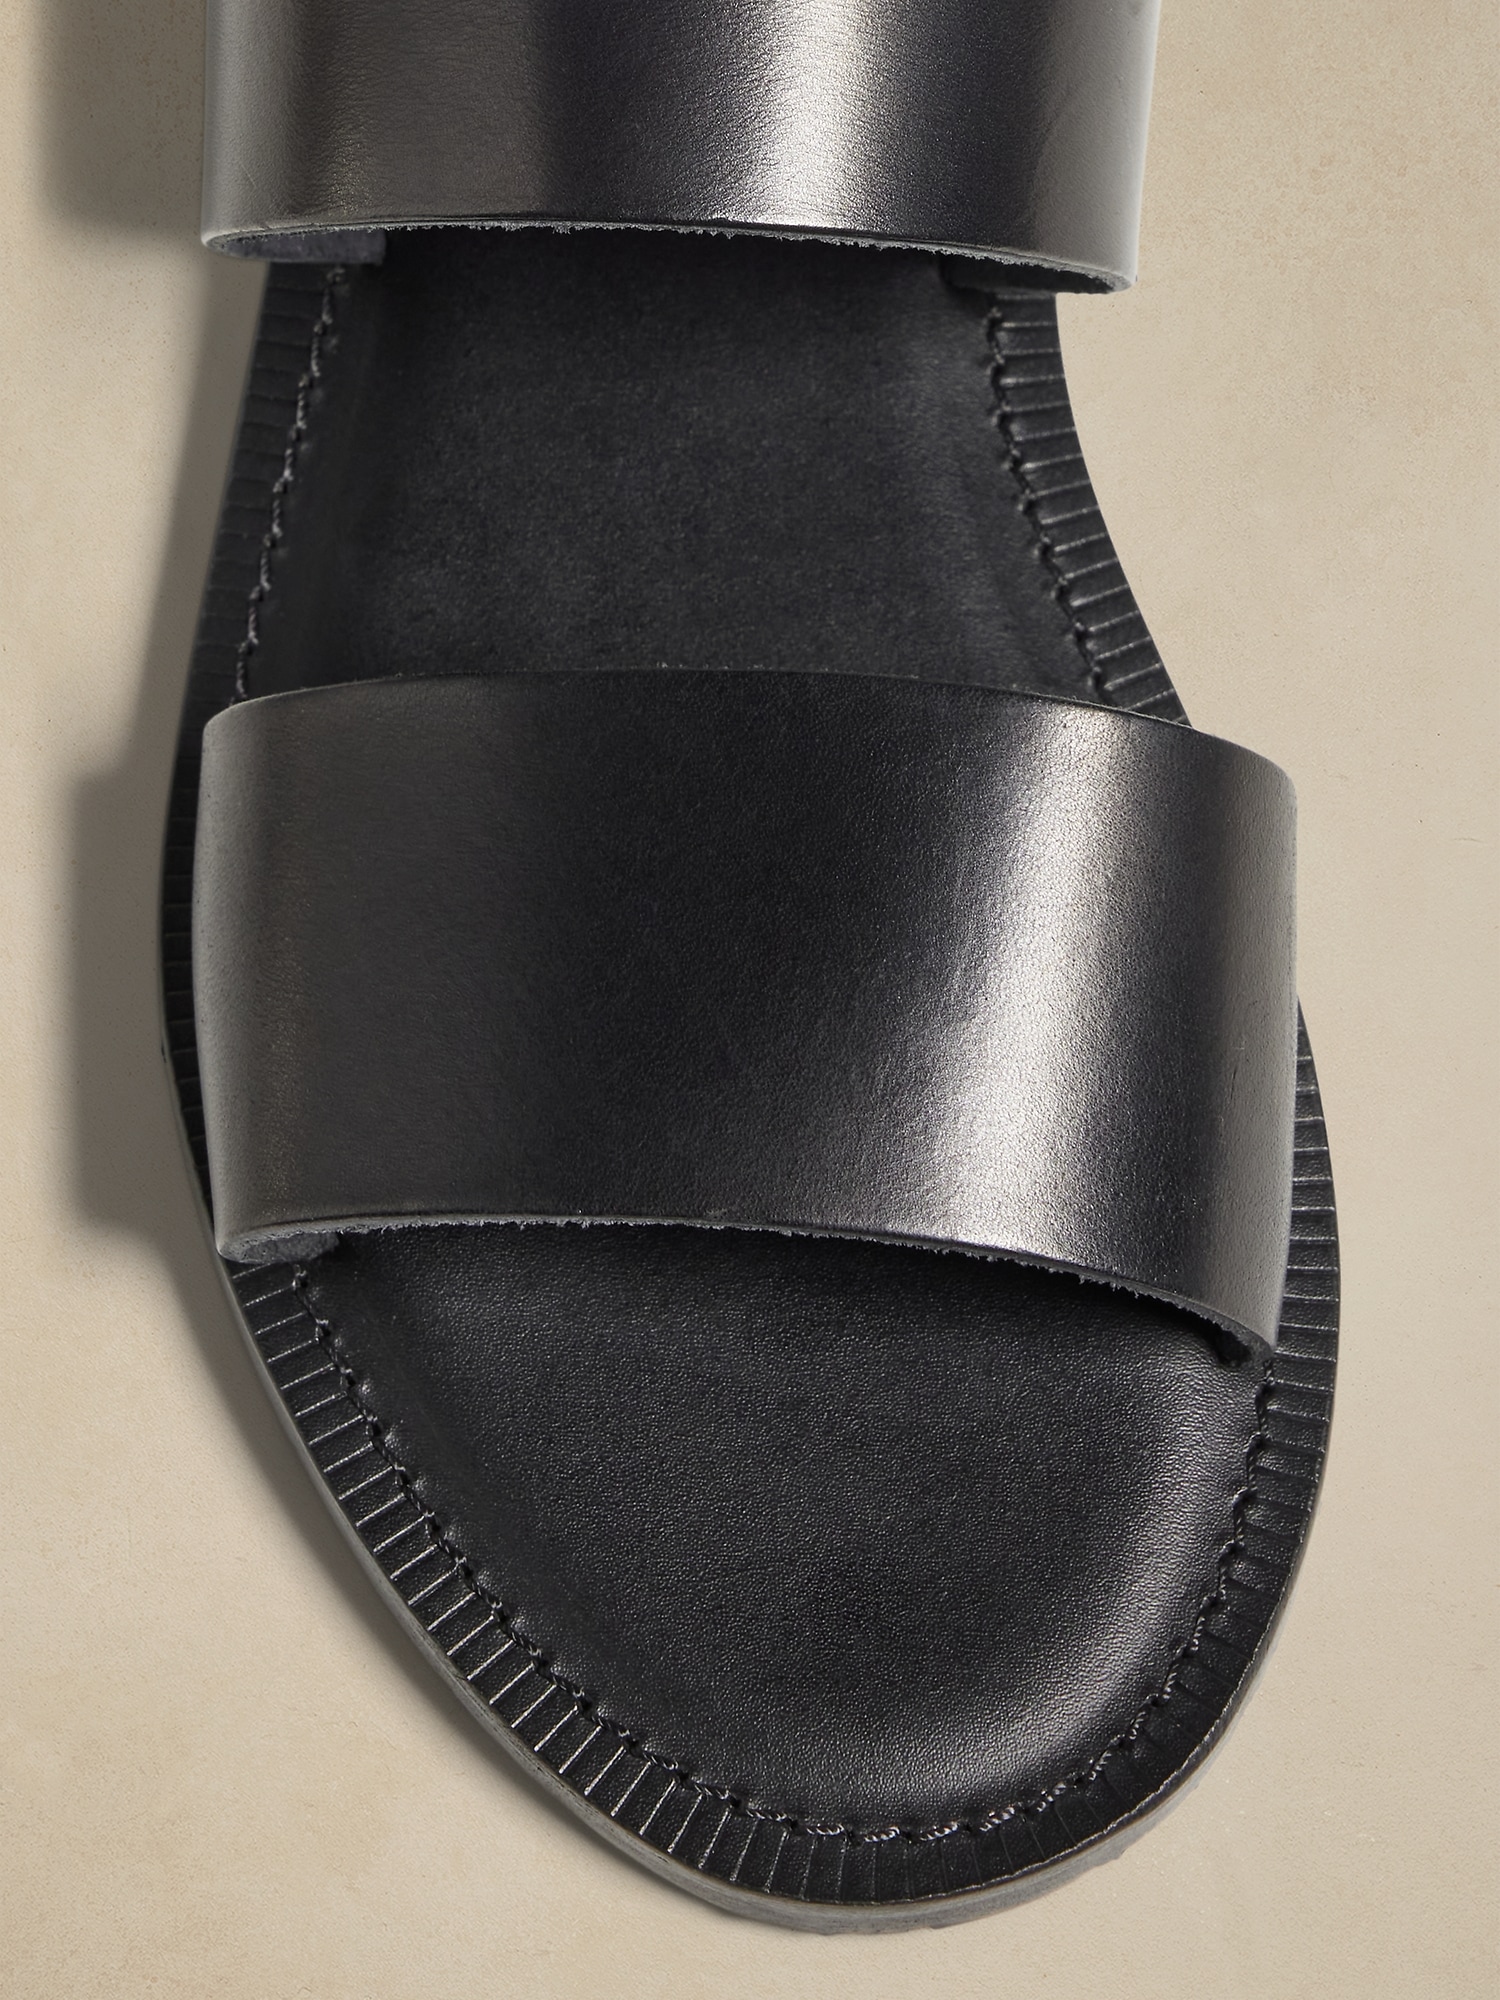 Italian Leather Double-Strap Sandal &#124 Crosby Square